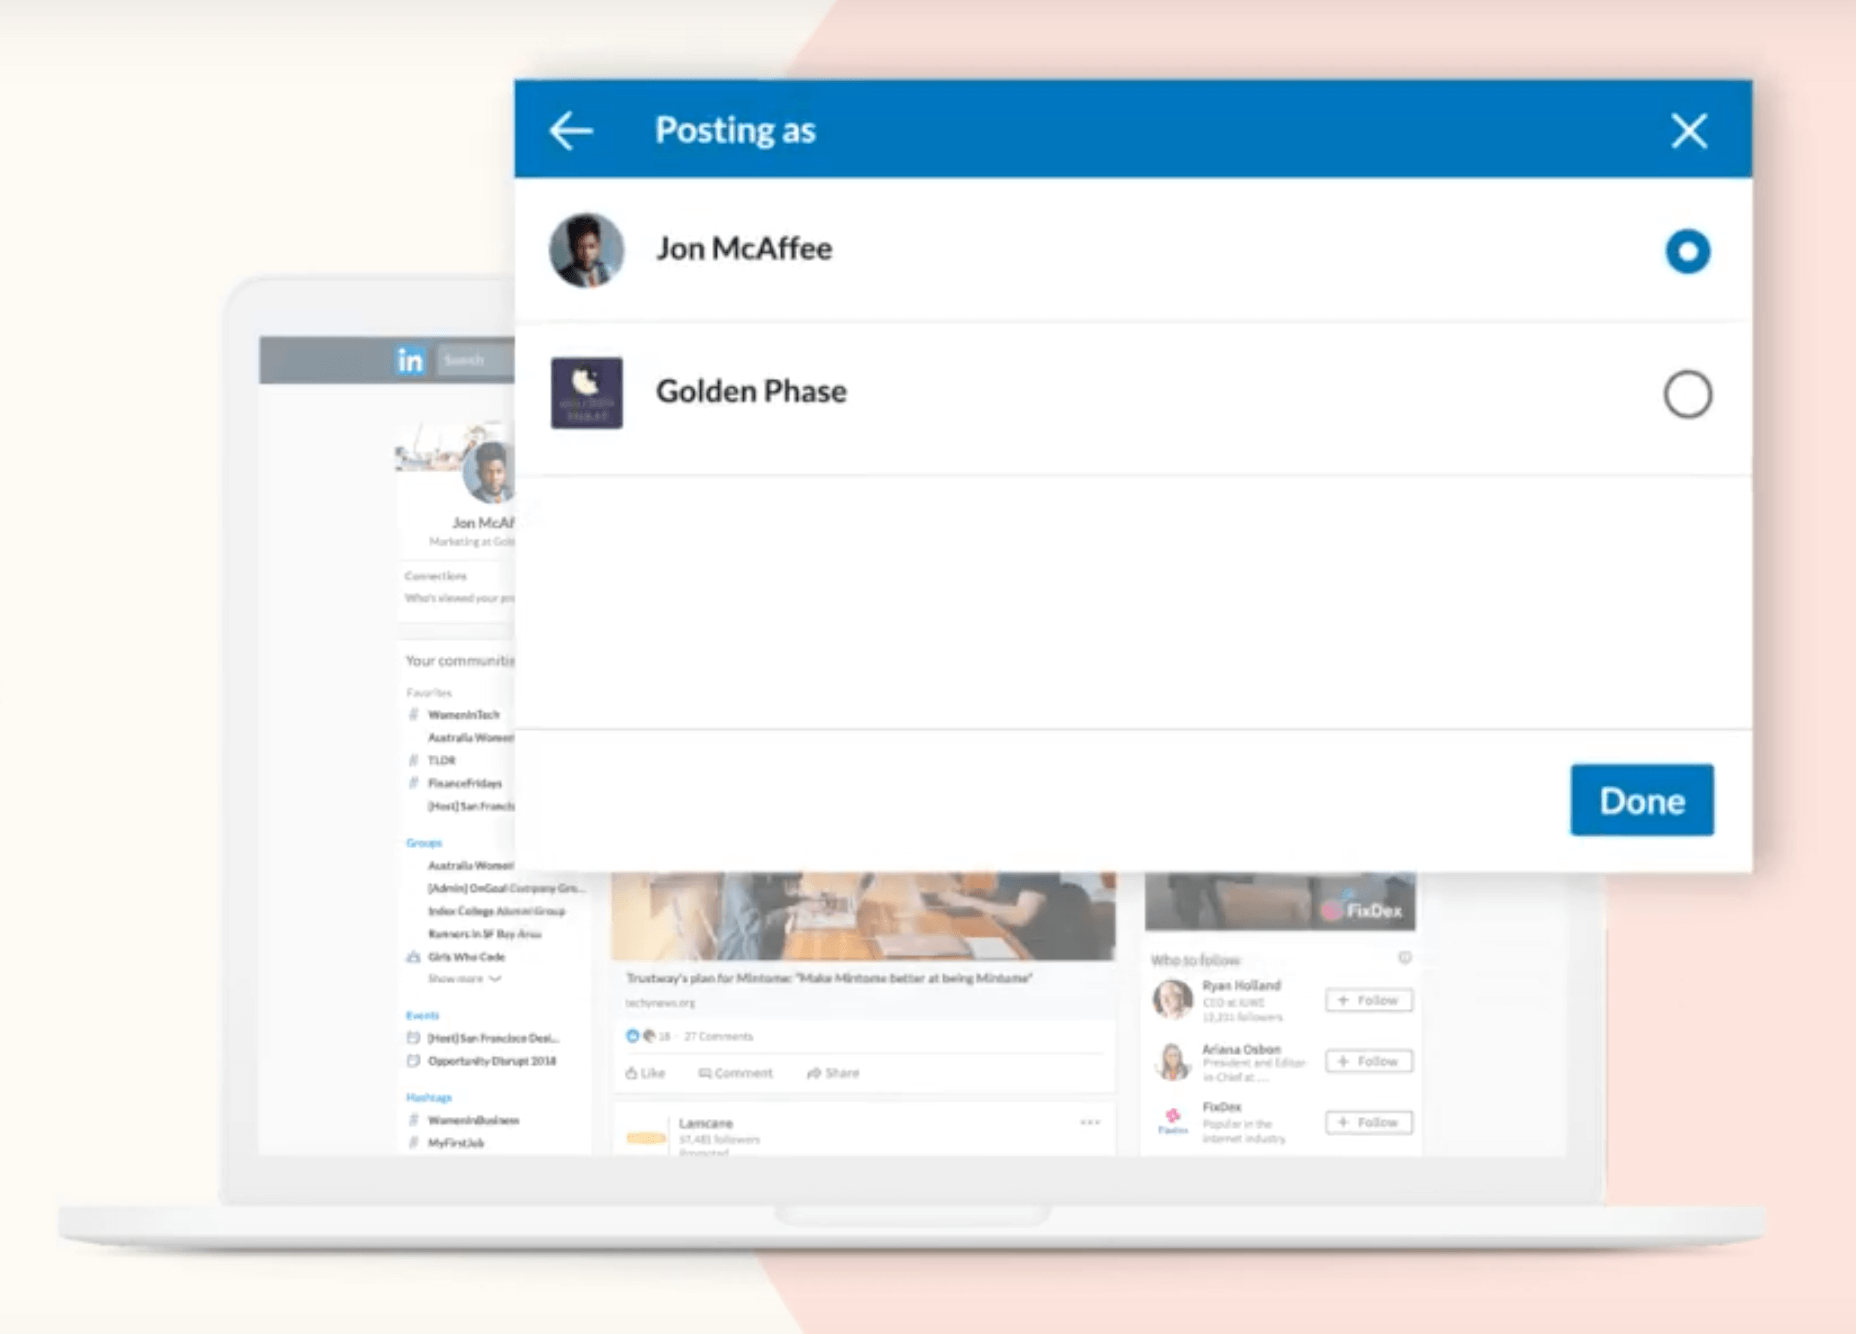 LinkedIn Pages adds tools to help businesses connect with users in more personal and interactive ways